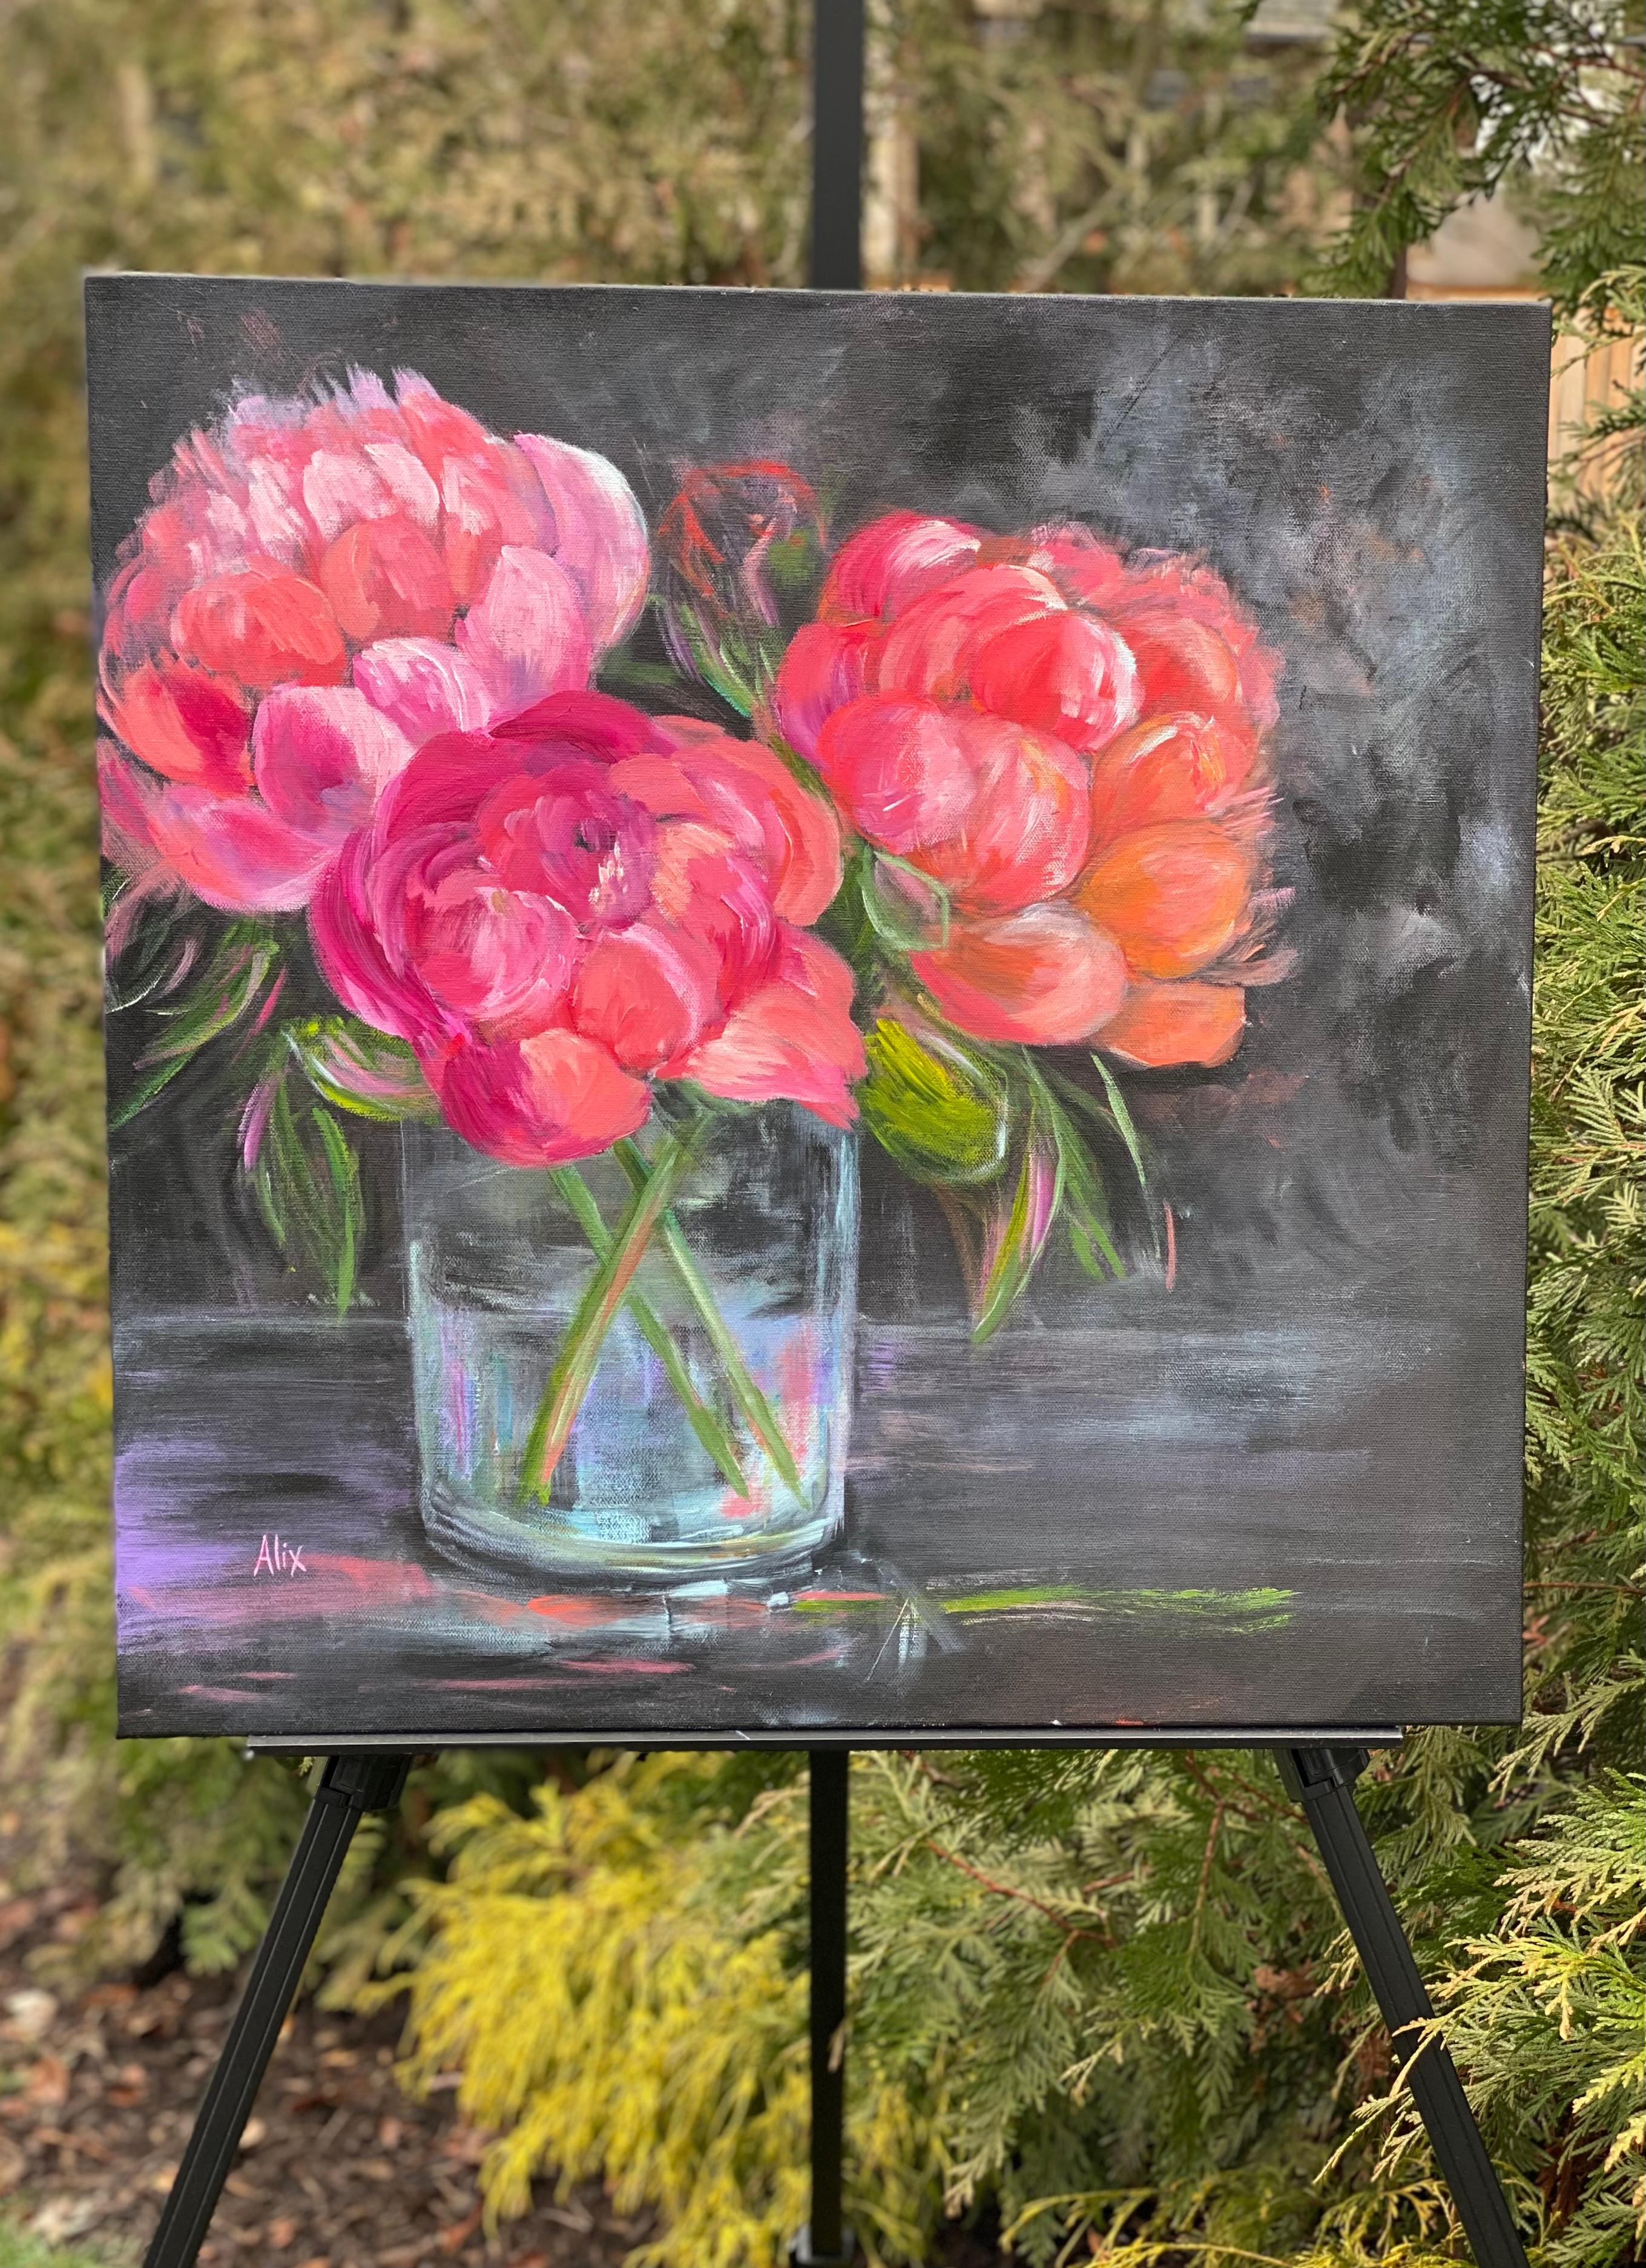 <p>Artist Comments<br>This still-life painting features peonies in shades of corals, pinks, and reds. Against a dark background, the flowers and vase stand out, creating a visually striking contrast. The reflective surface of the table mirrors the